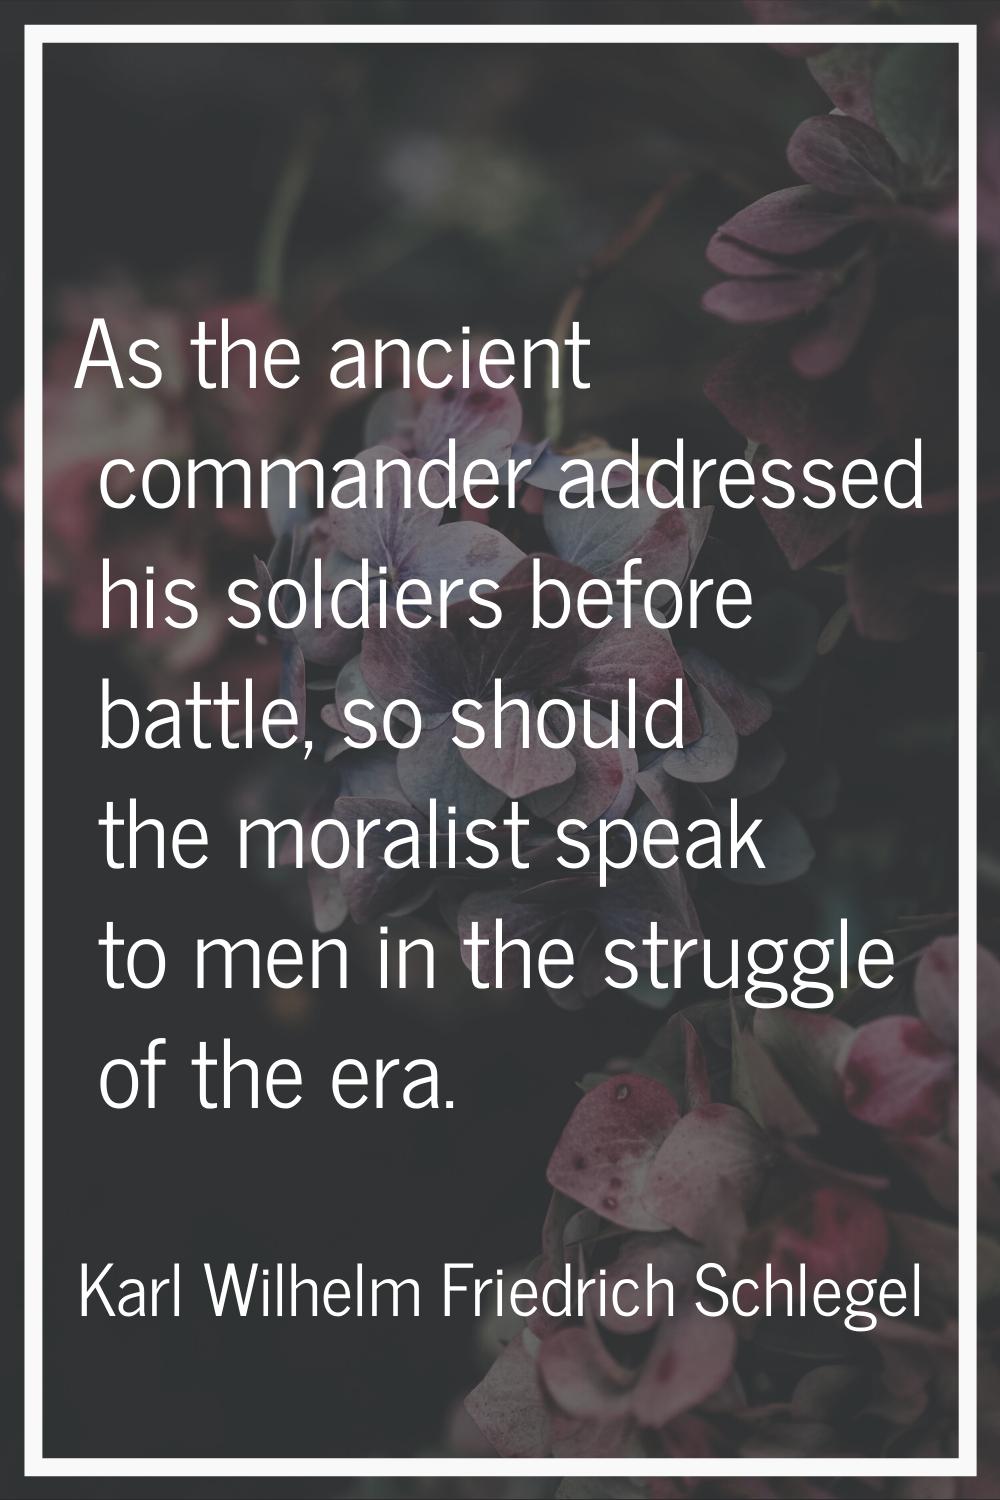 As the ancient commander addressed his soldiers before battle, so should the moralist speak to men 